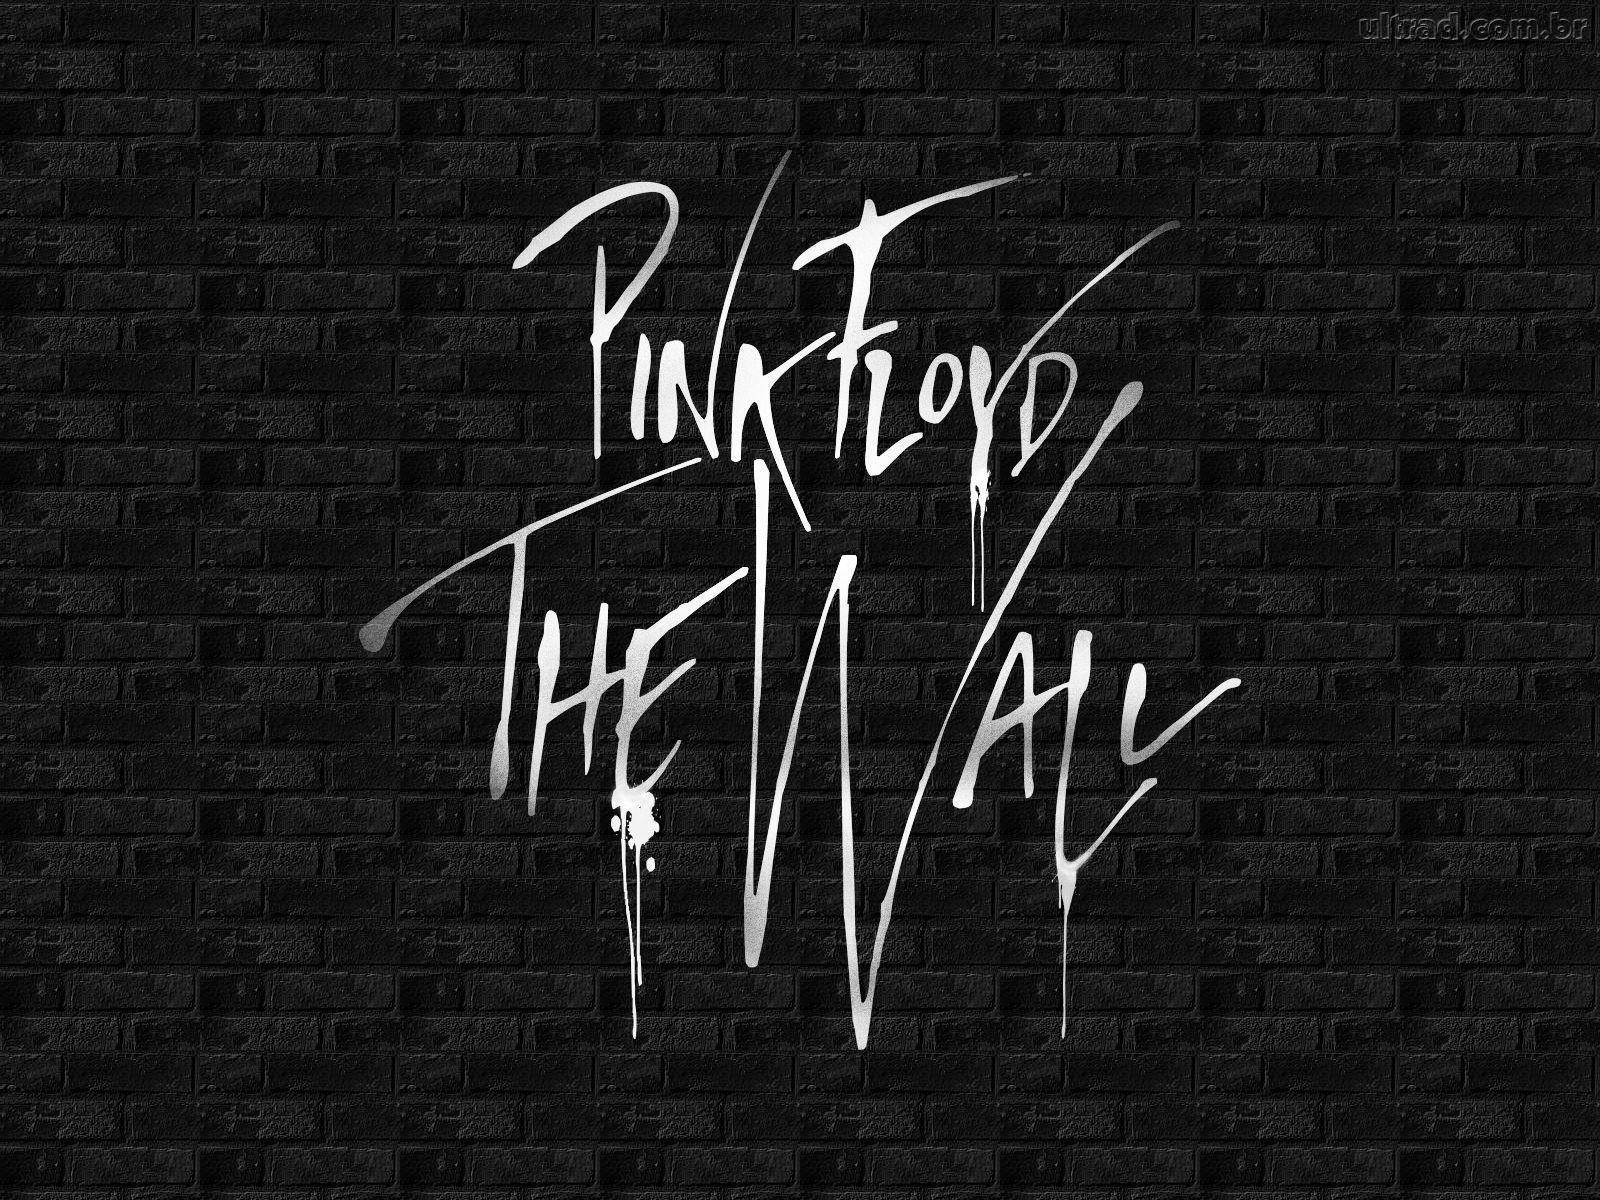 Pink Floyd The Wall Wallpaper 1600x1200PX Wallpaper Free Pink